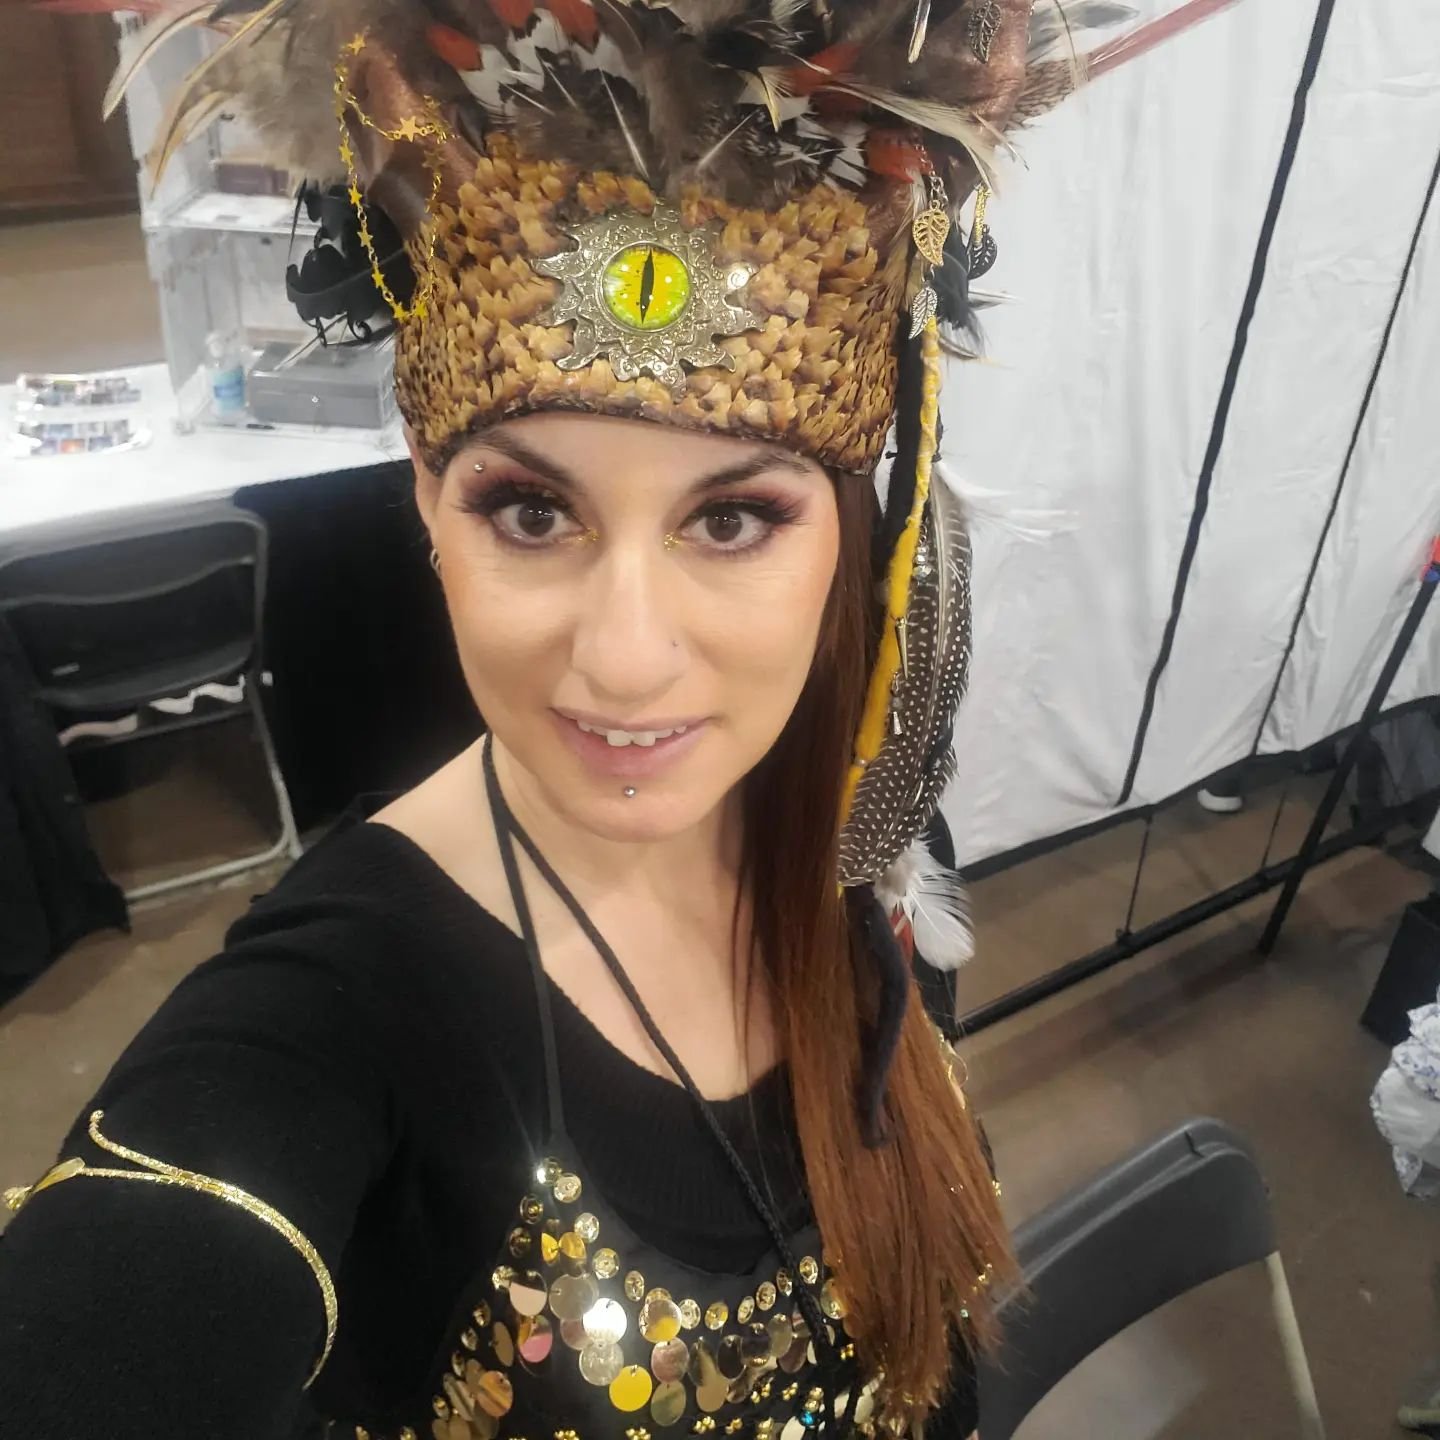 Feeling into my Dragon side today! Ready for Sauturday @calgaryexpo 🐉✨️🐉Join us in the Arist Alley for some incredible art! 🎨
#dragonhead #headpiece #calgaryexpo #etherealbeauty #djkart1212